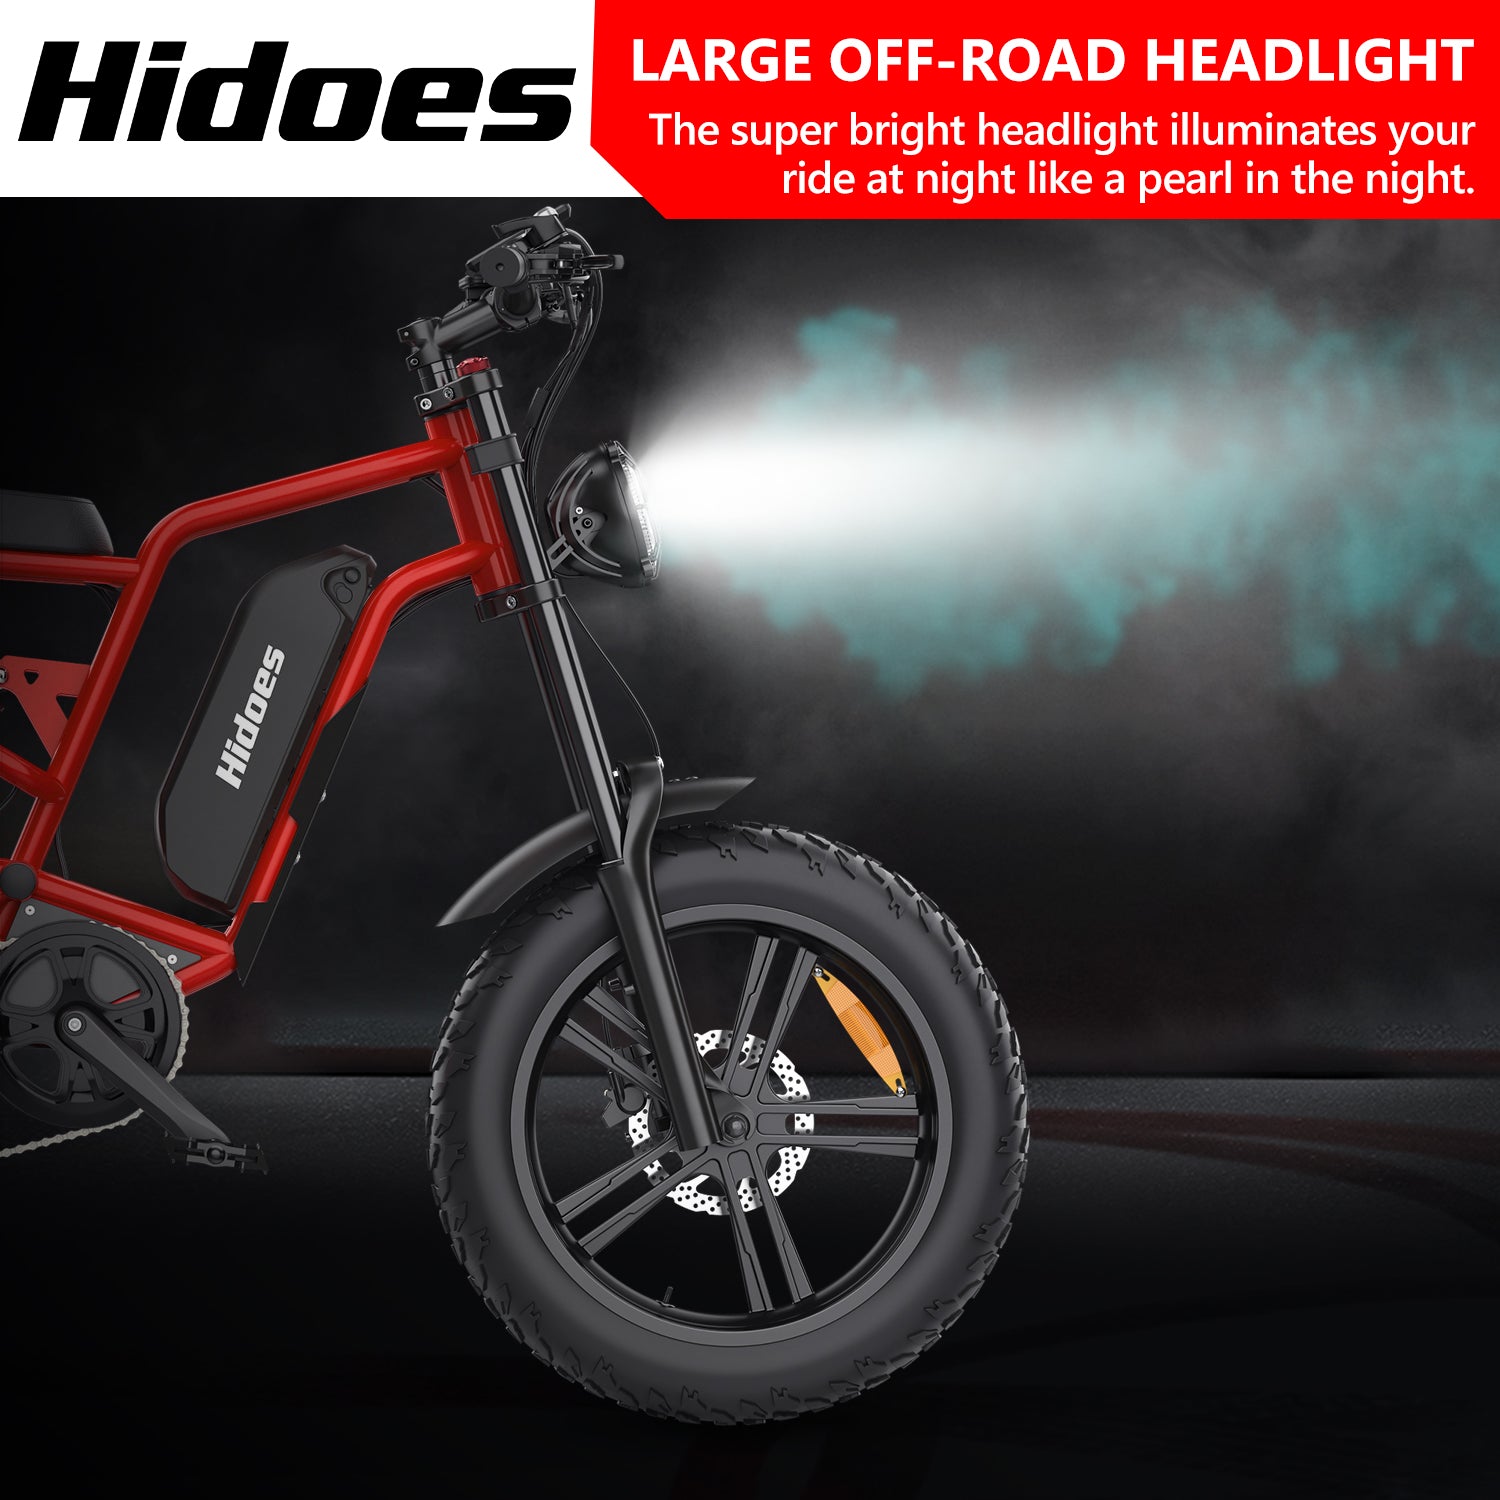 Hidoes B6 fat tire electric bike with large size LED front light, off road bright headlight